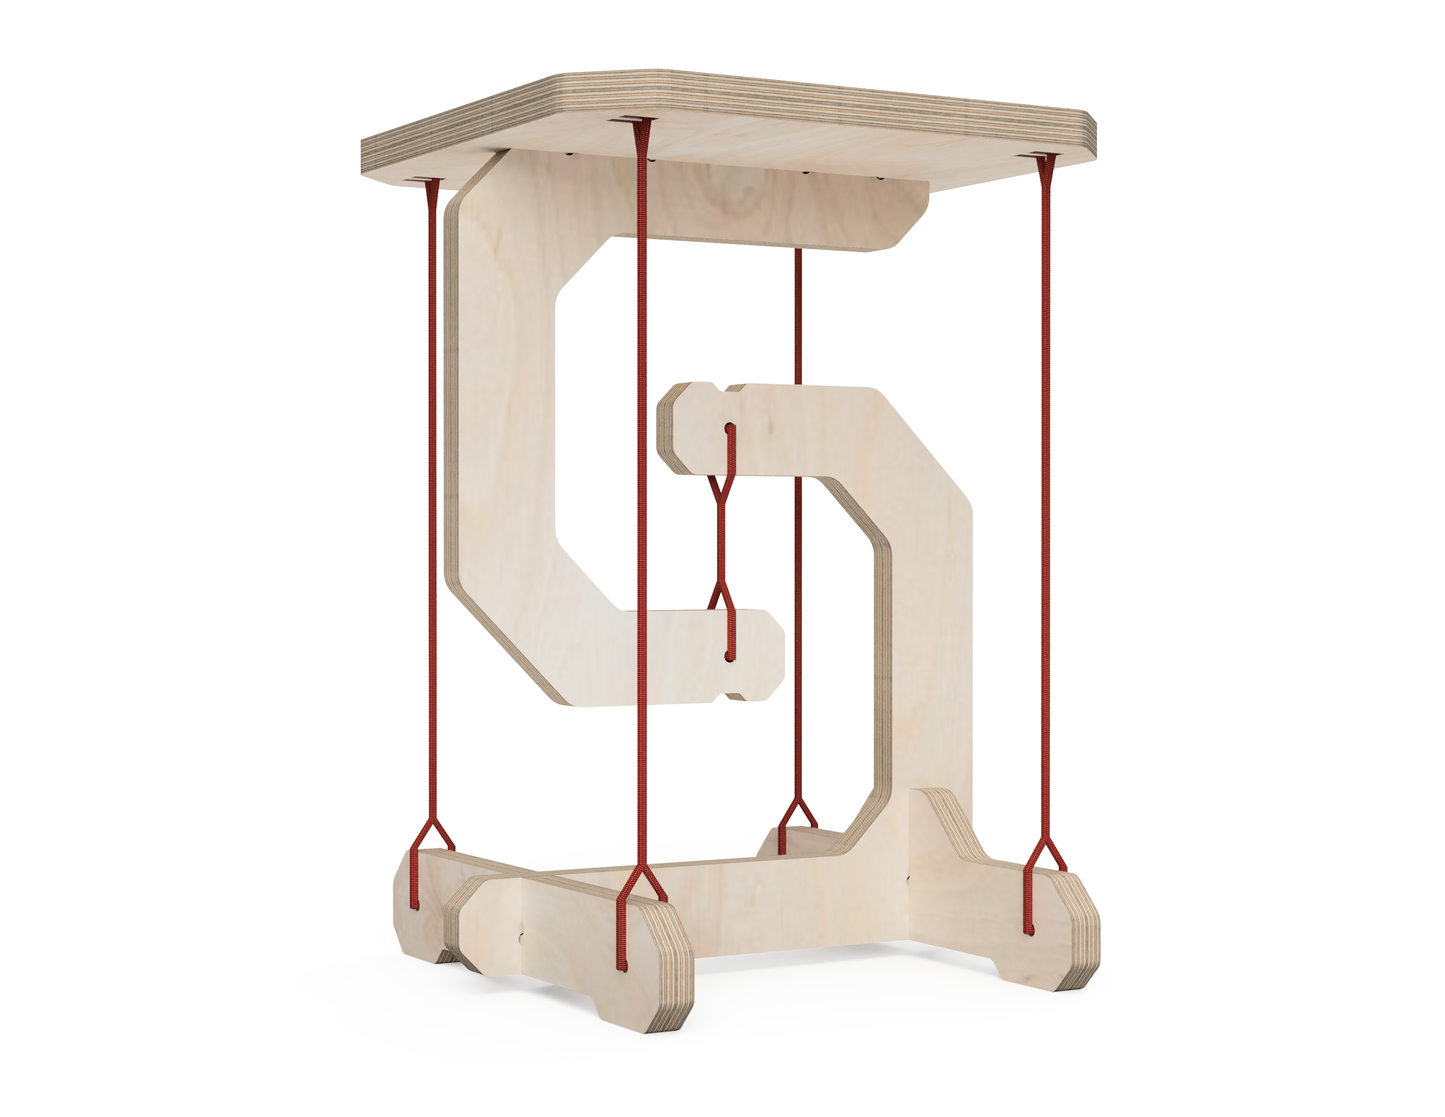 Tensegrity stool DXF file